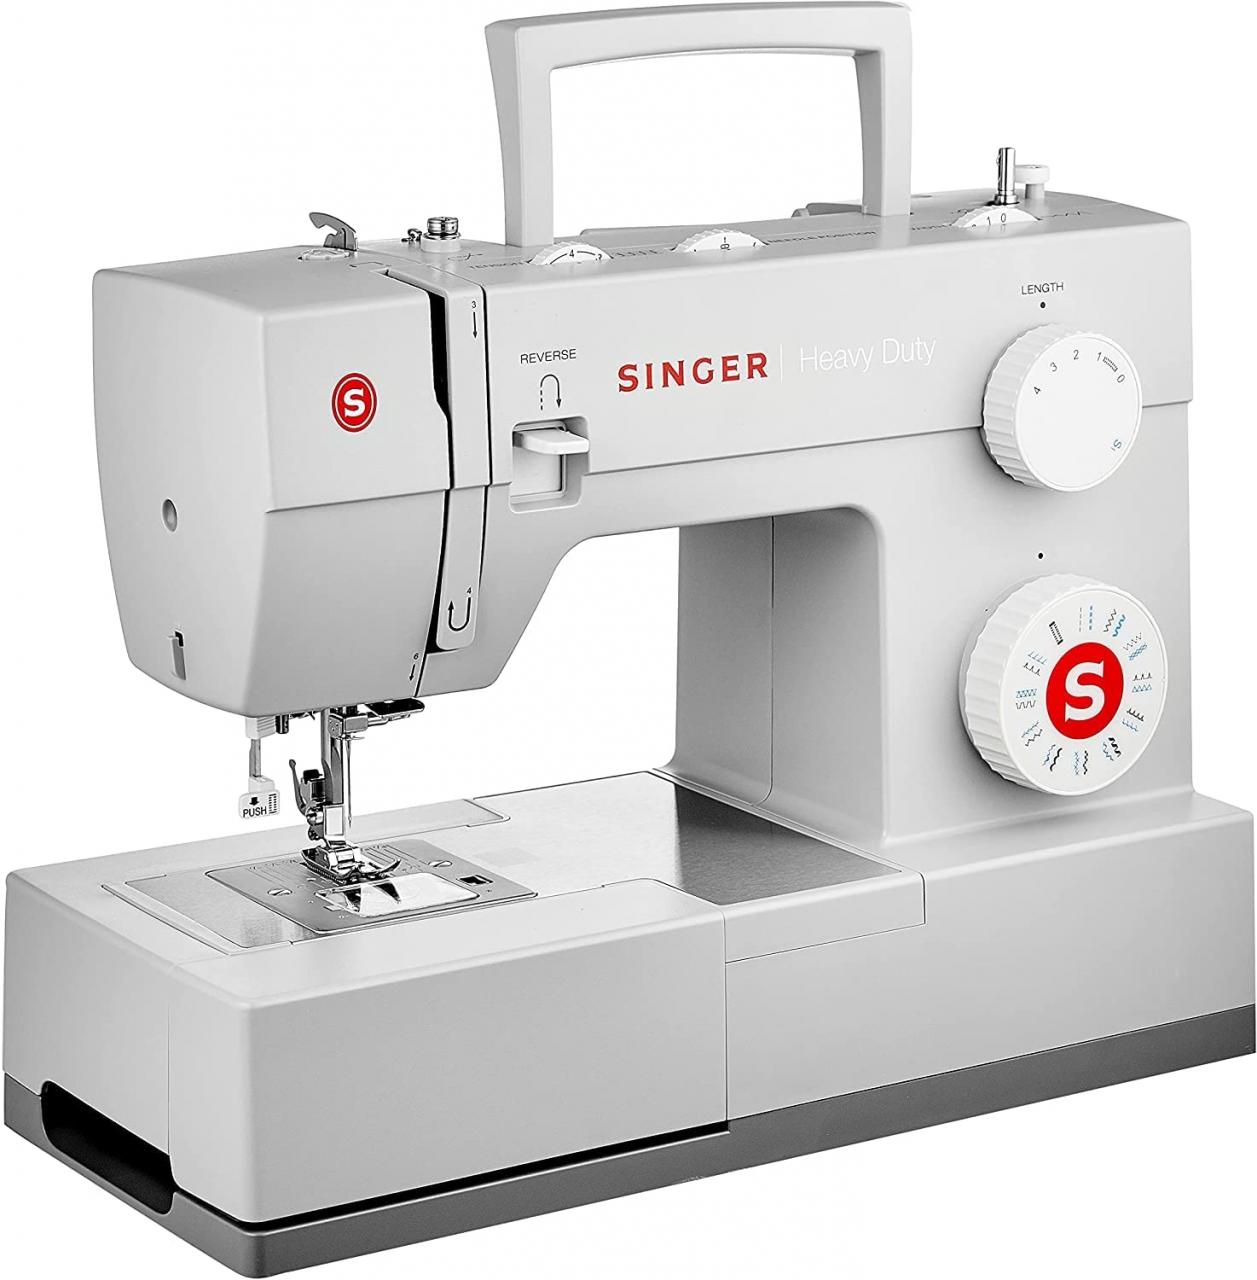 SINGER Heavy Sewing Machine Heavy Duty 4423 NGN180,000 - NGN216,000